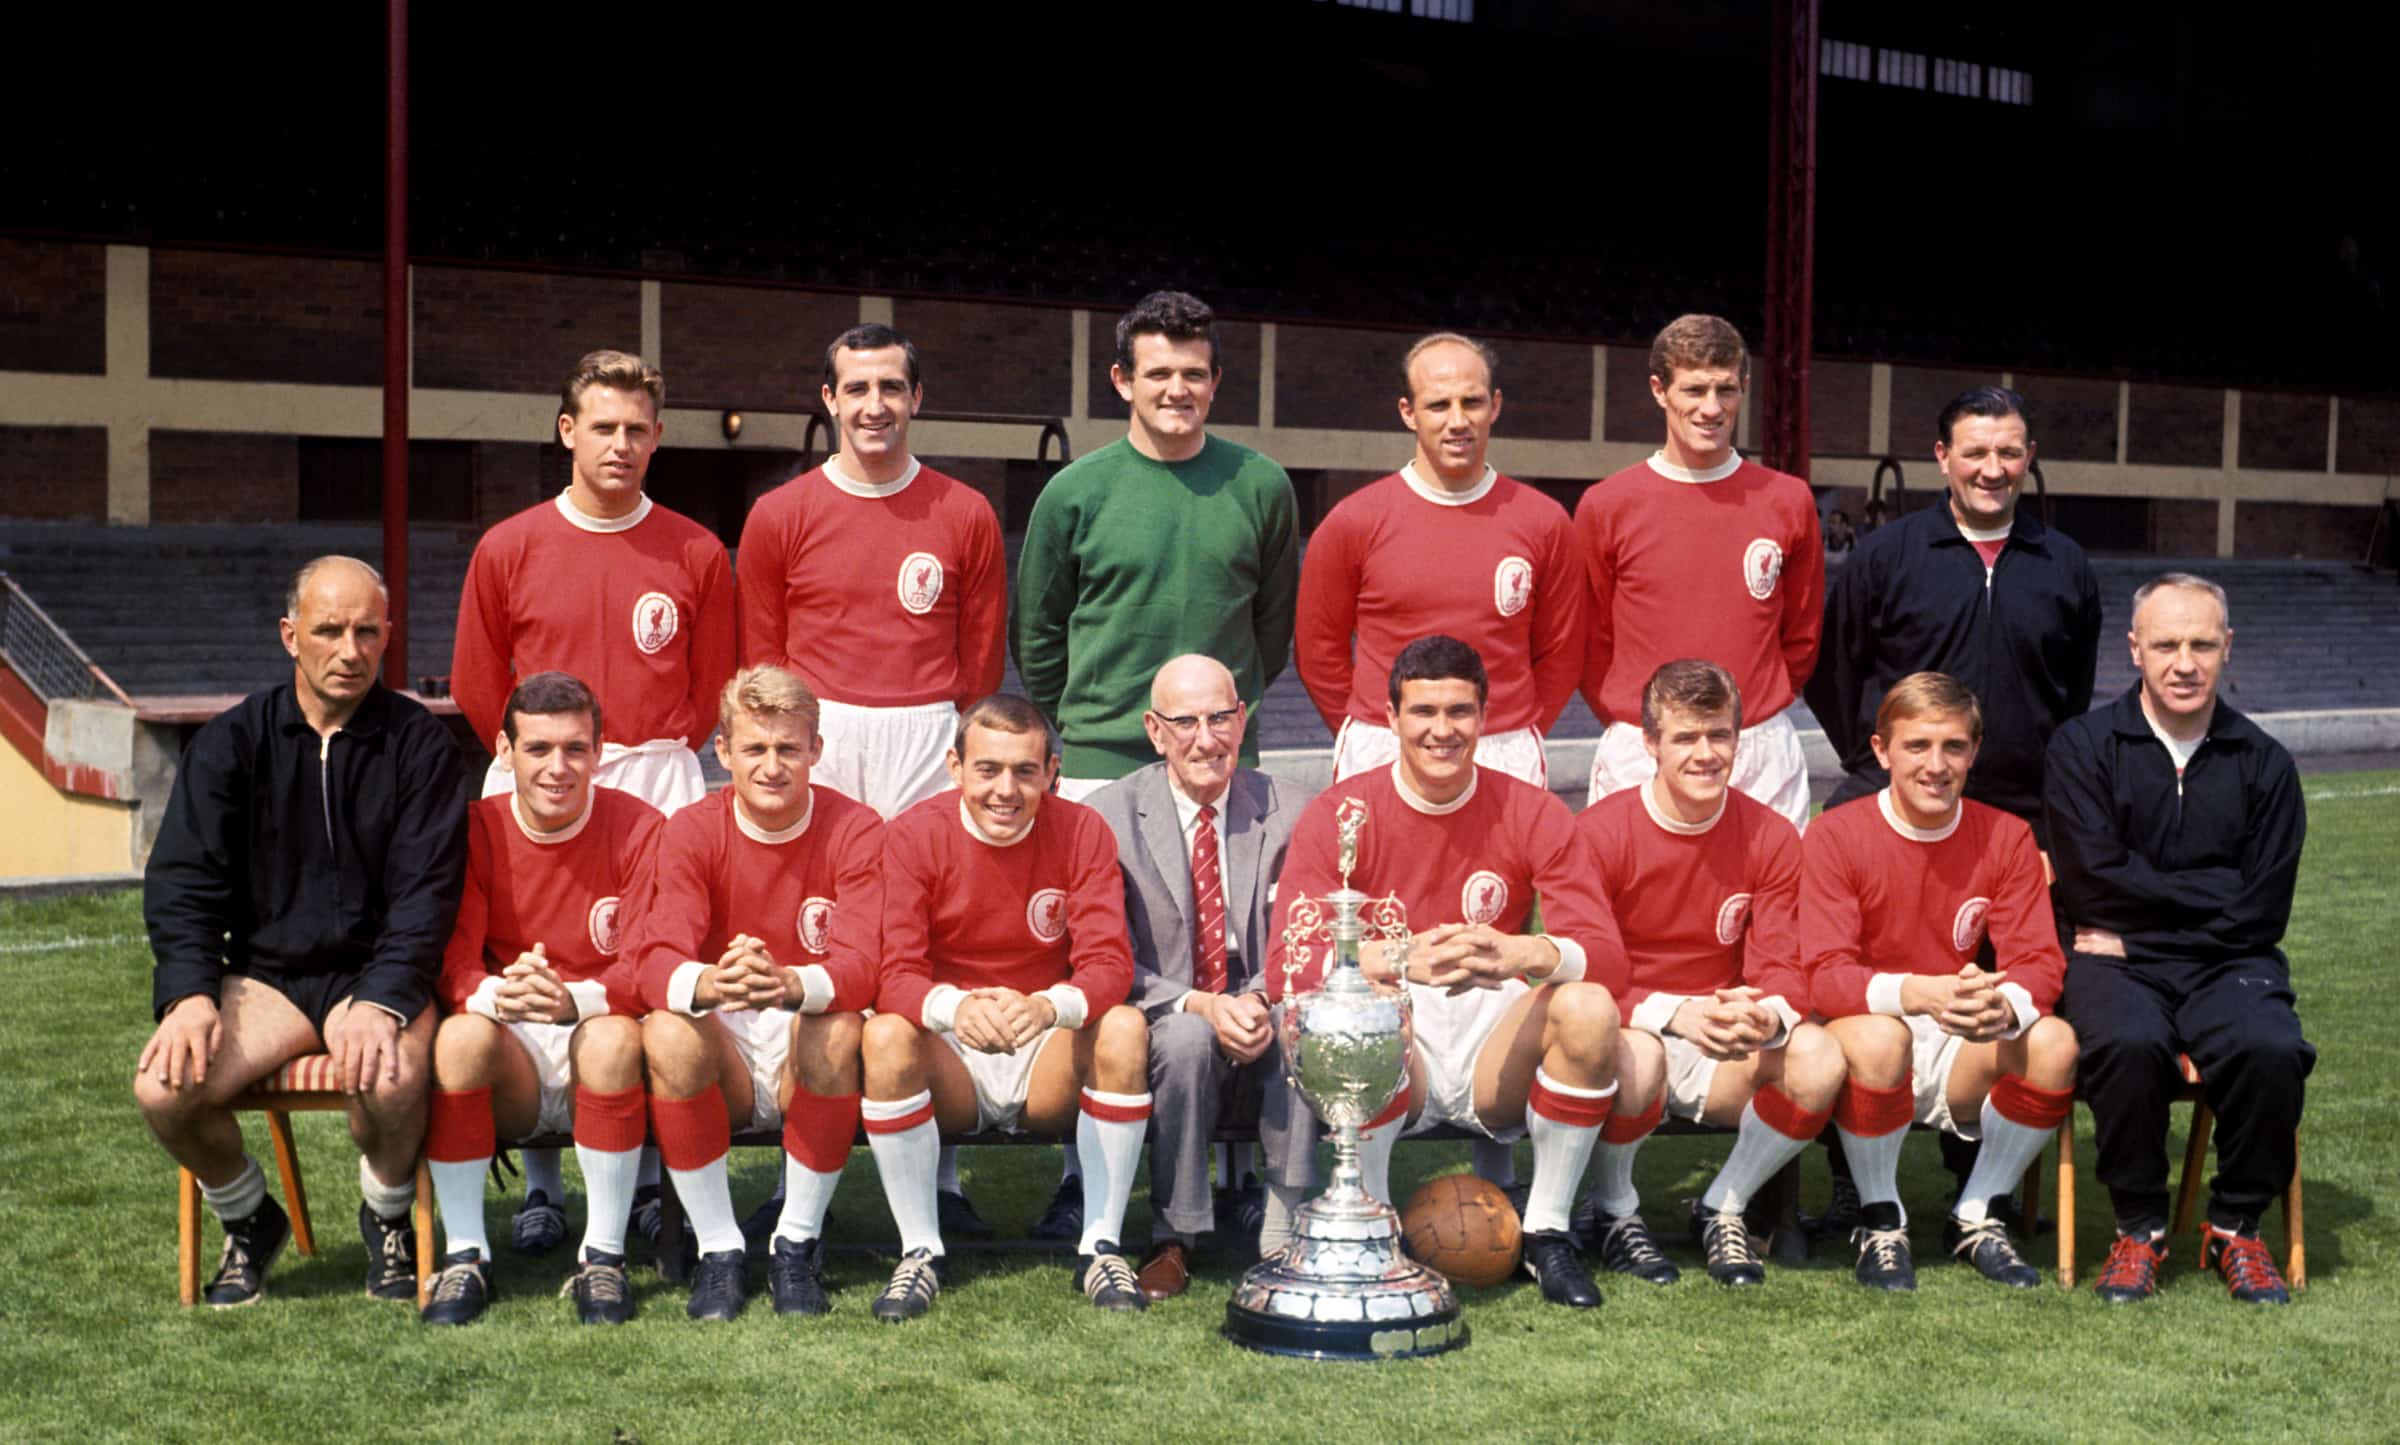 League champions Liverpool pose with the trophy: (back row, l-r) Gordon Milne, Gerry Byrne, Tommy Lawrence, Ronnie Moran, Wilf Stevenson, trainer Bob Paisley; (front row, l-r) trainer Reuben Bennett, Ian Callaghan, Roger Hunt, Ian St John, ?, Ron Yeats, Alf Arrowsmith, Peter Thompson, manager Bill Shankly. 12 August 1964. ( PA Photos/PA Archive/PA Images)